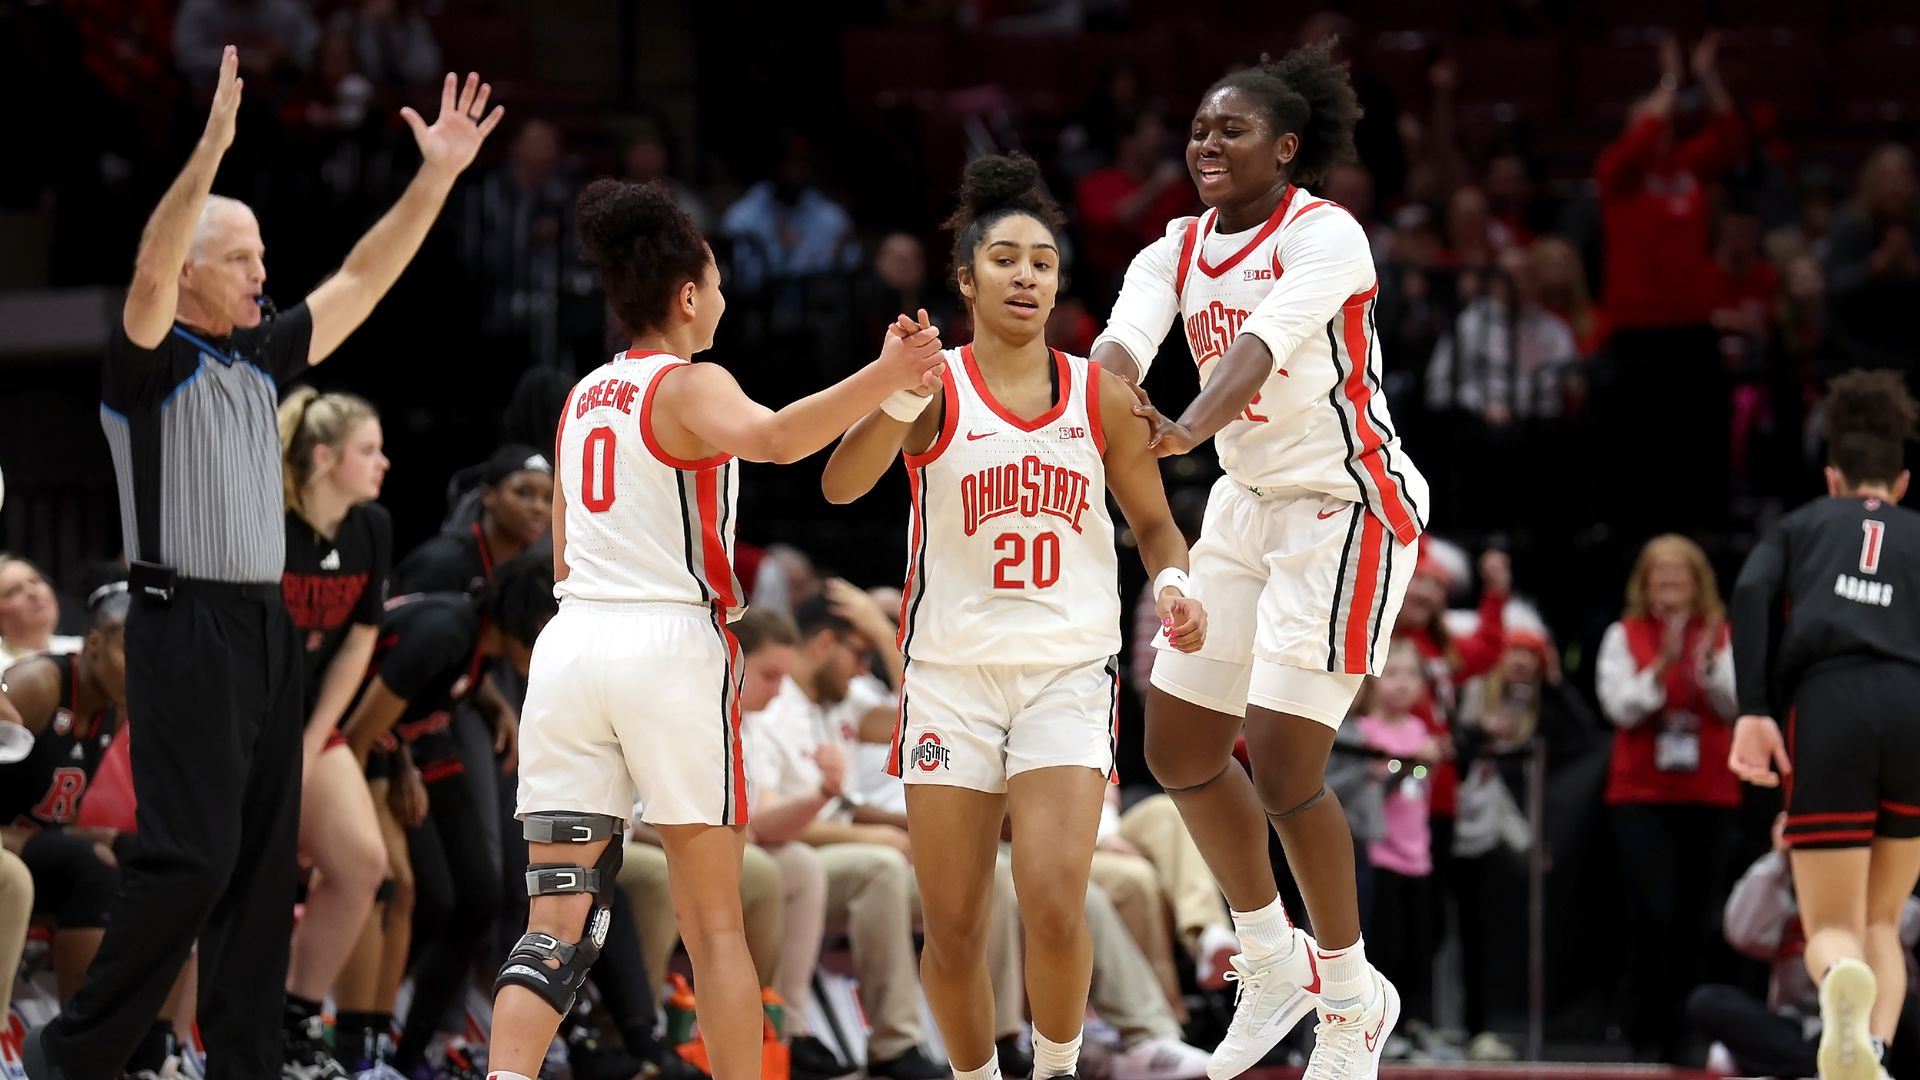 ohio state women’s basketball “whole again,” entering march madness